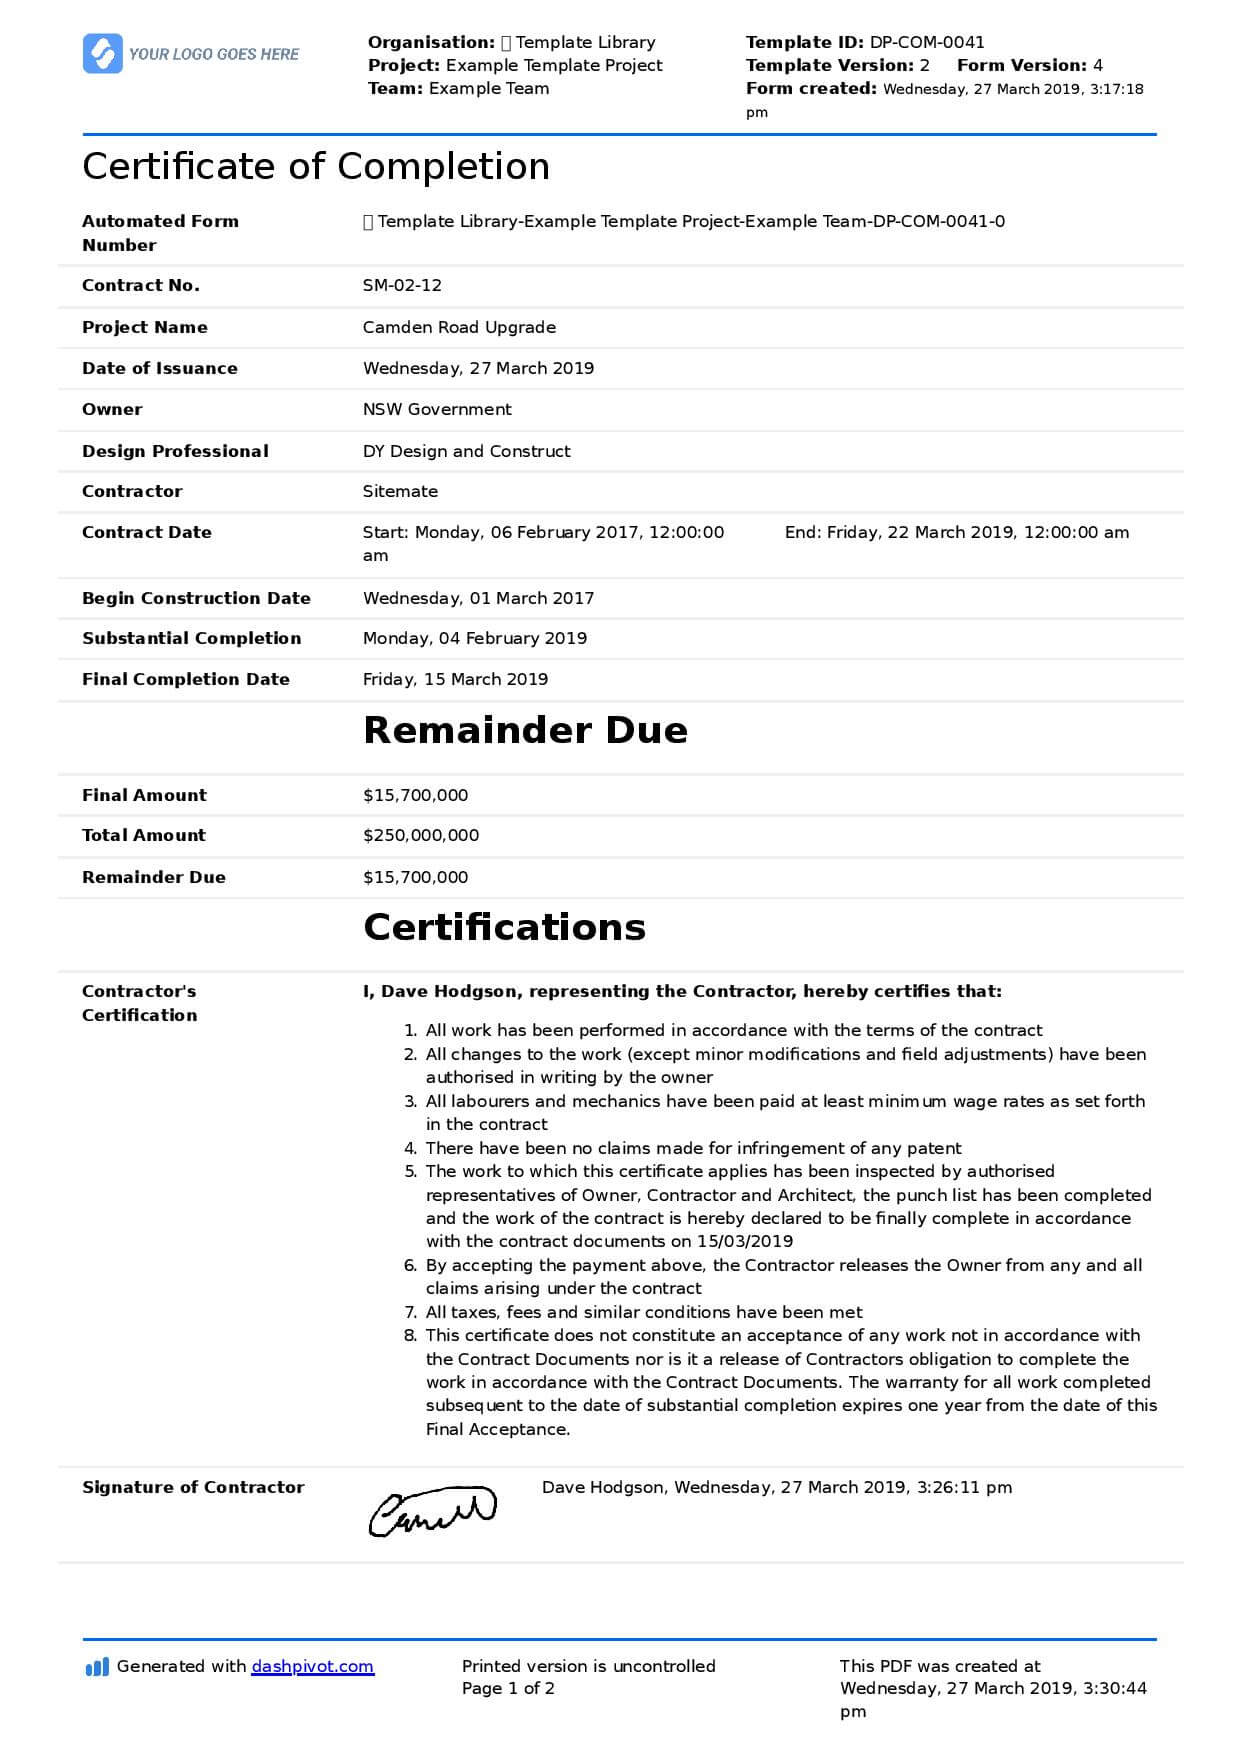 Certificate Of Completion For Construction (Free Template + With Regard To Construction Payment Certificate Template